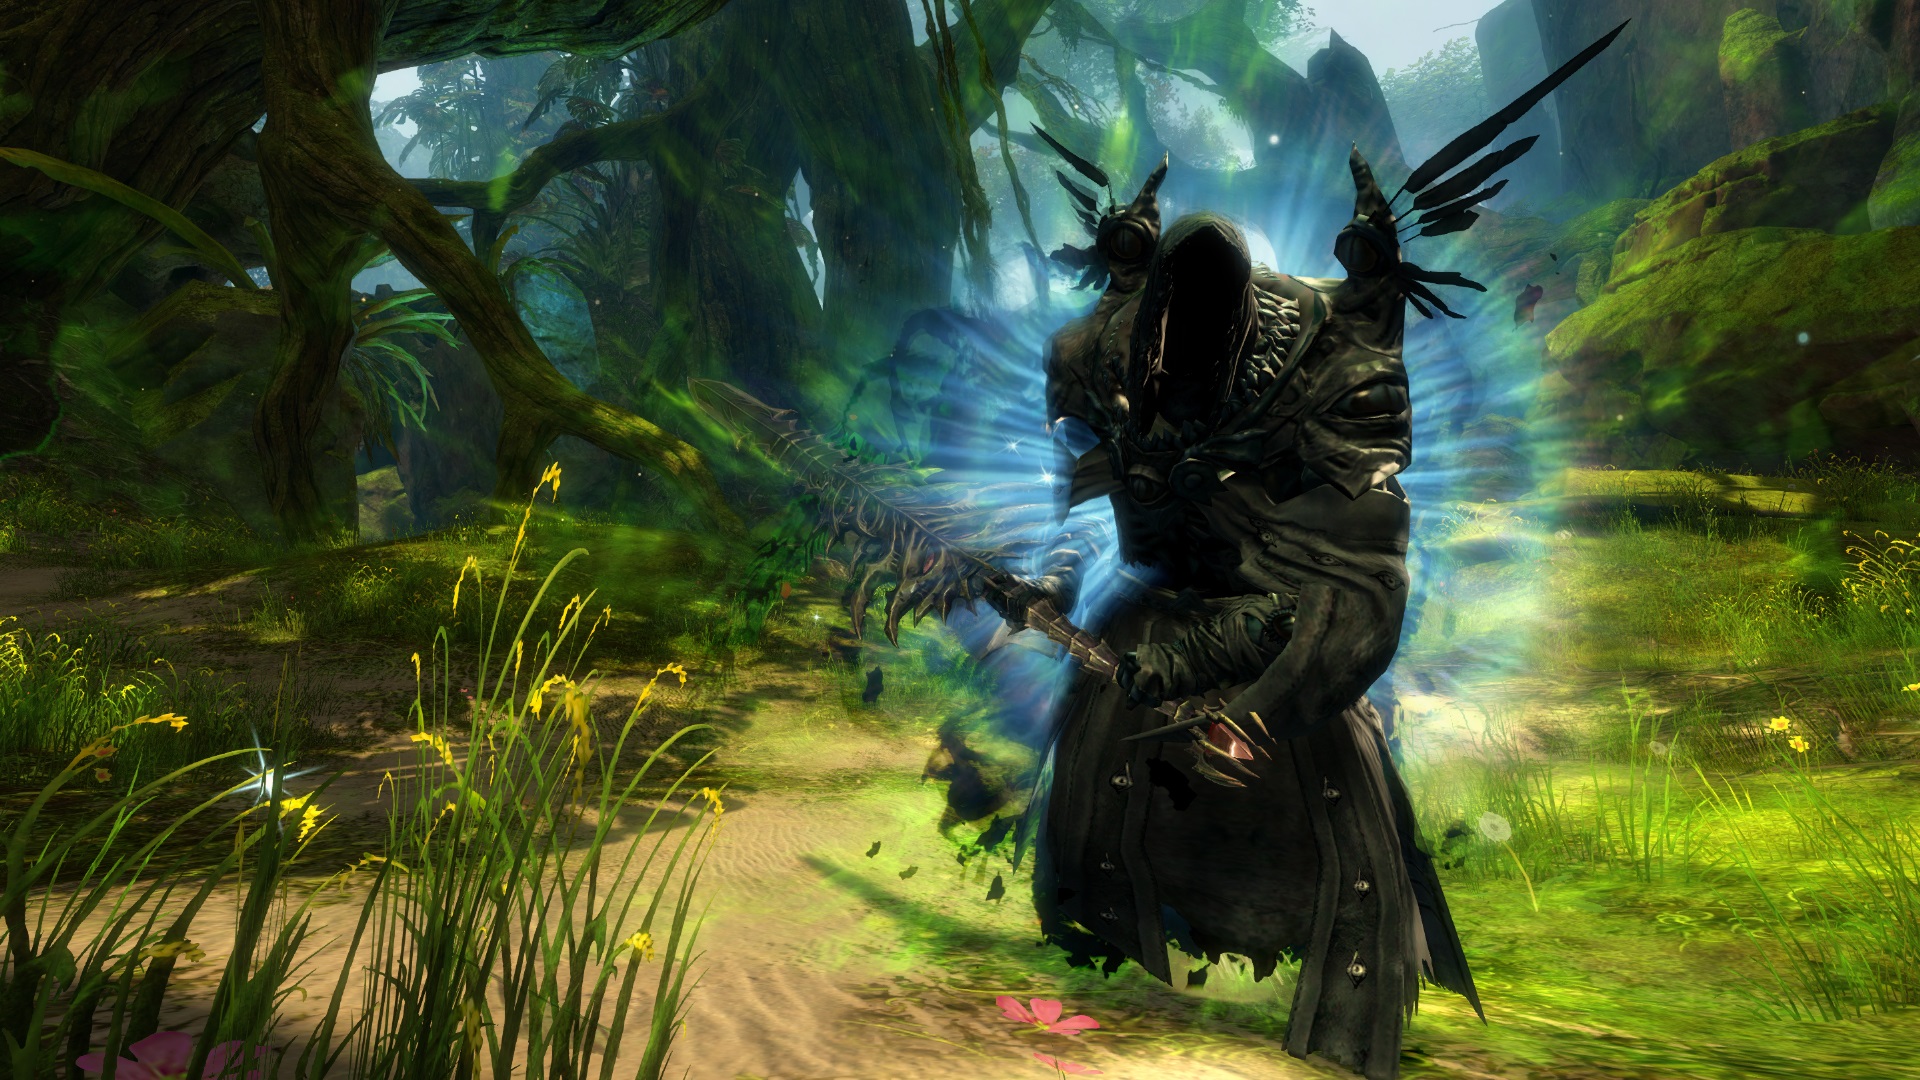 guild wars 2 heart of thorns